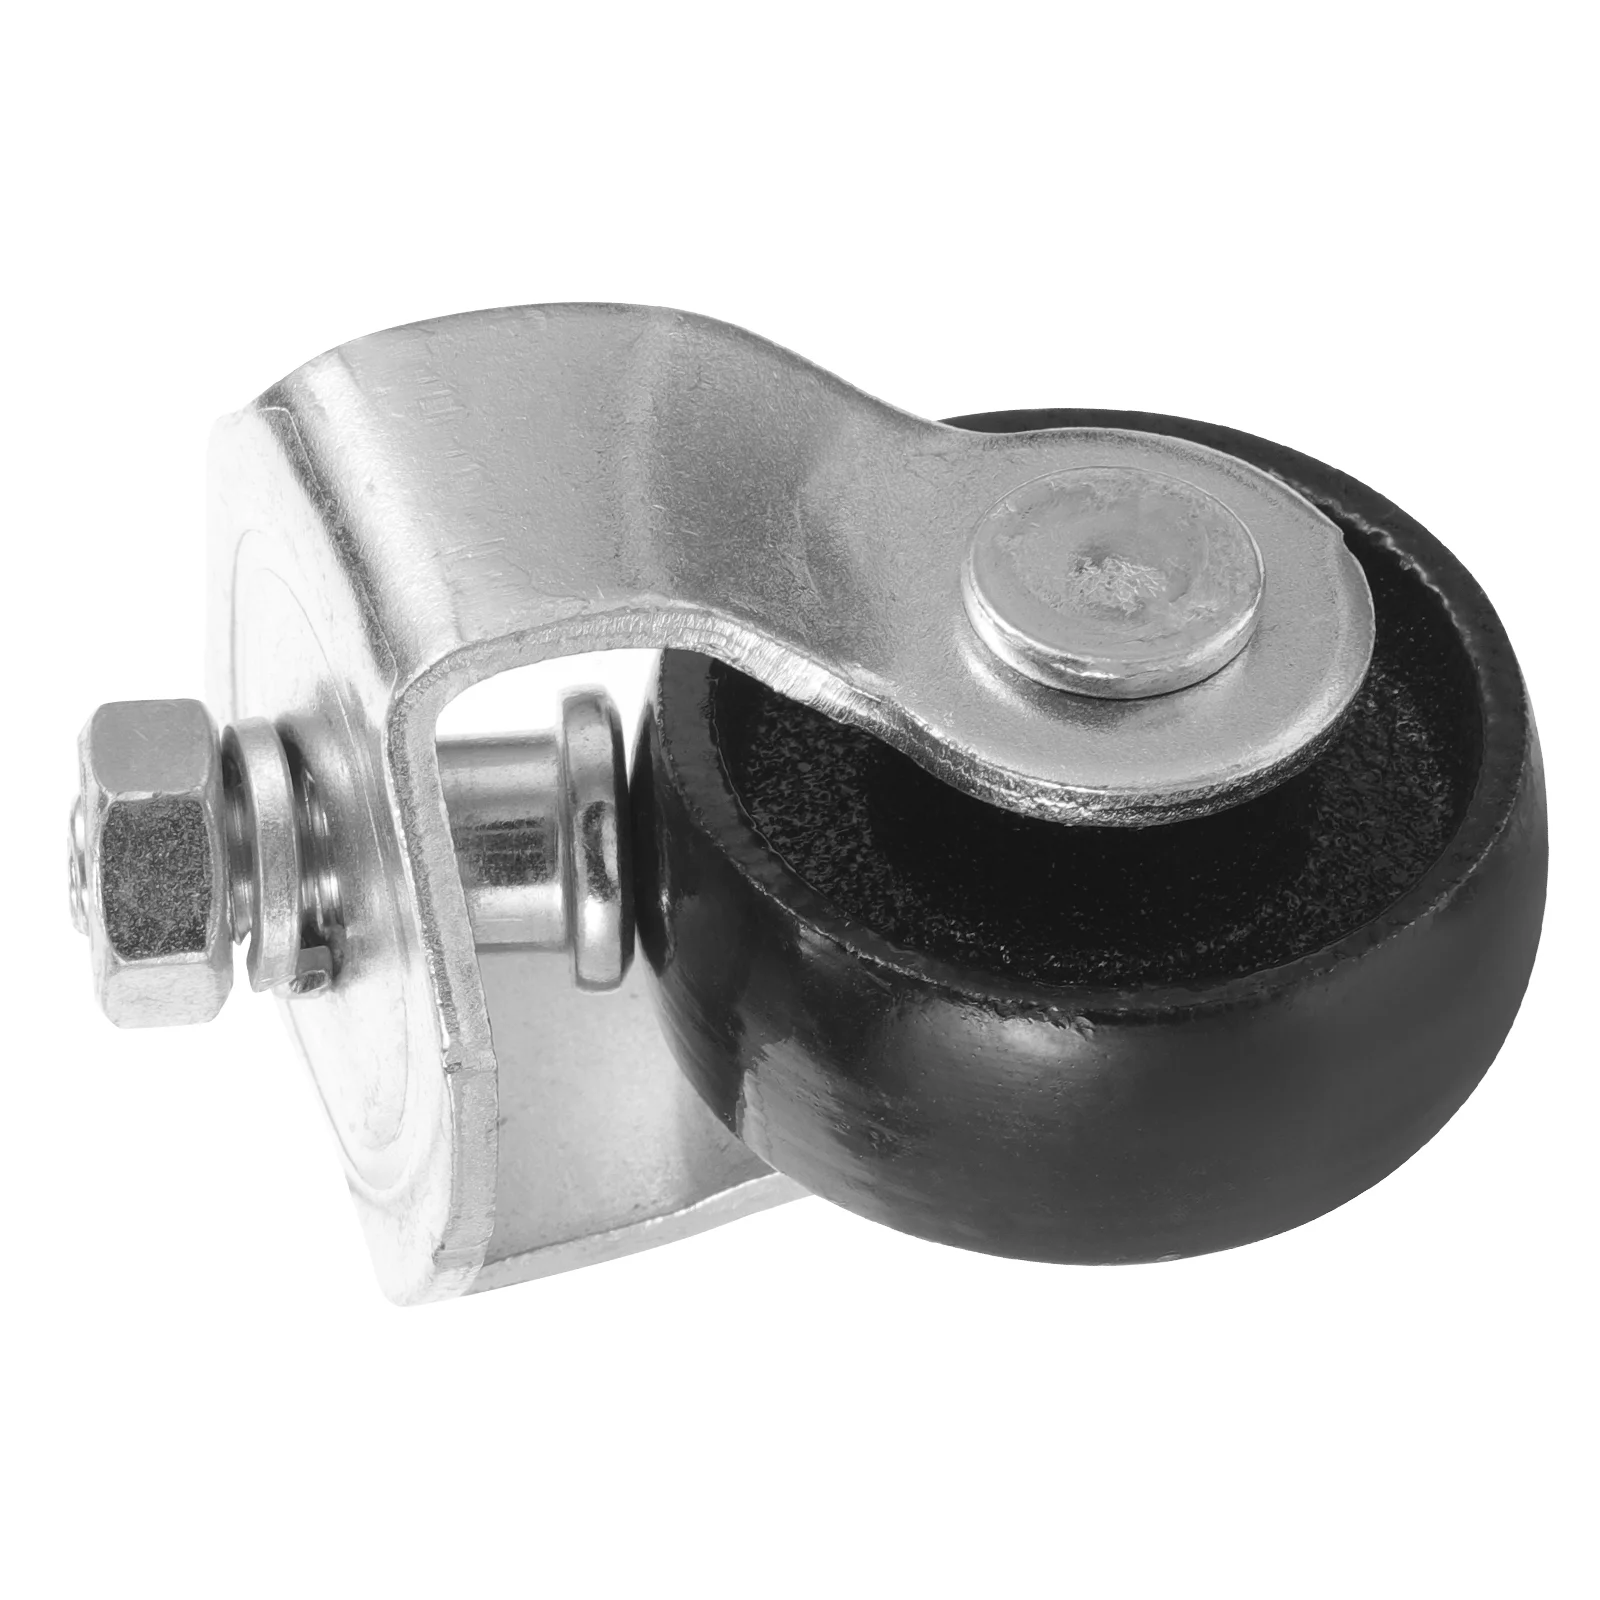 Jack Front Wheel Car Floor Casters Wheels for Garage Replacement Steel Heavy Duty Supplies Horizontal Hydraulic